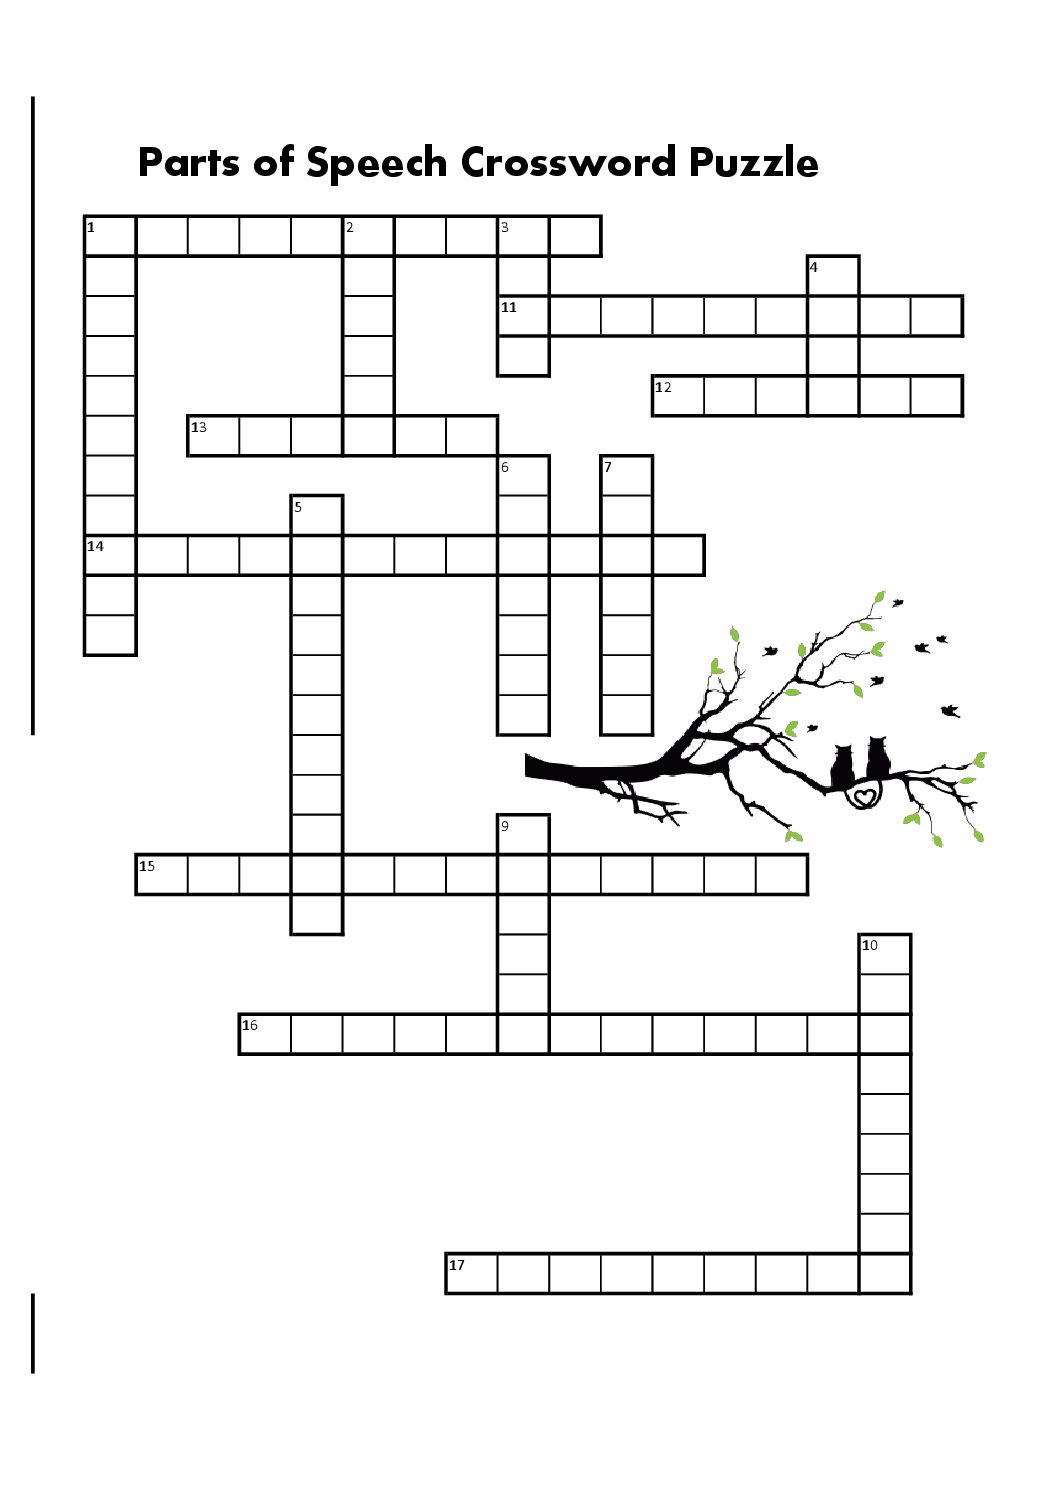 deliver a speech to crossword clue